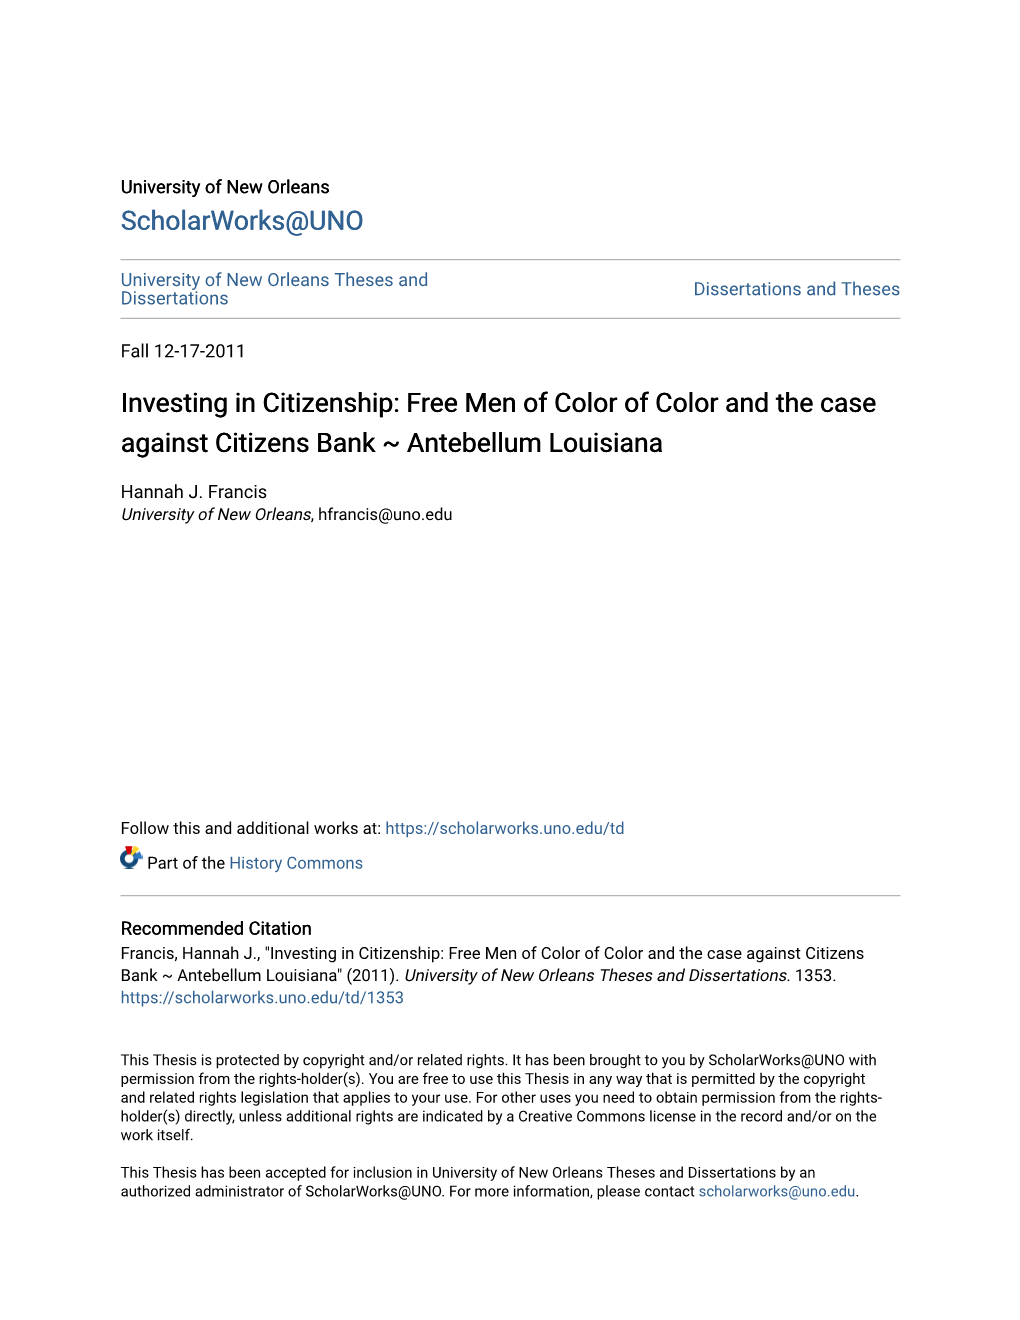 Investing in Citizenship: Free Men of Color of Color and the Case Against Citizens Bank ~ Antebellum Louisiana